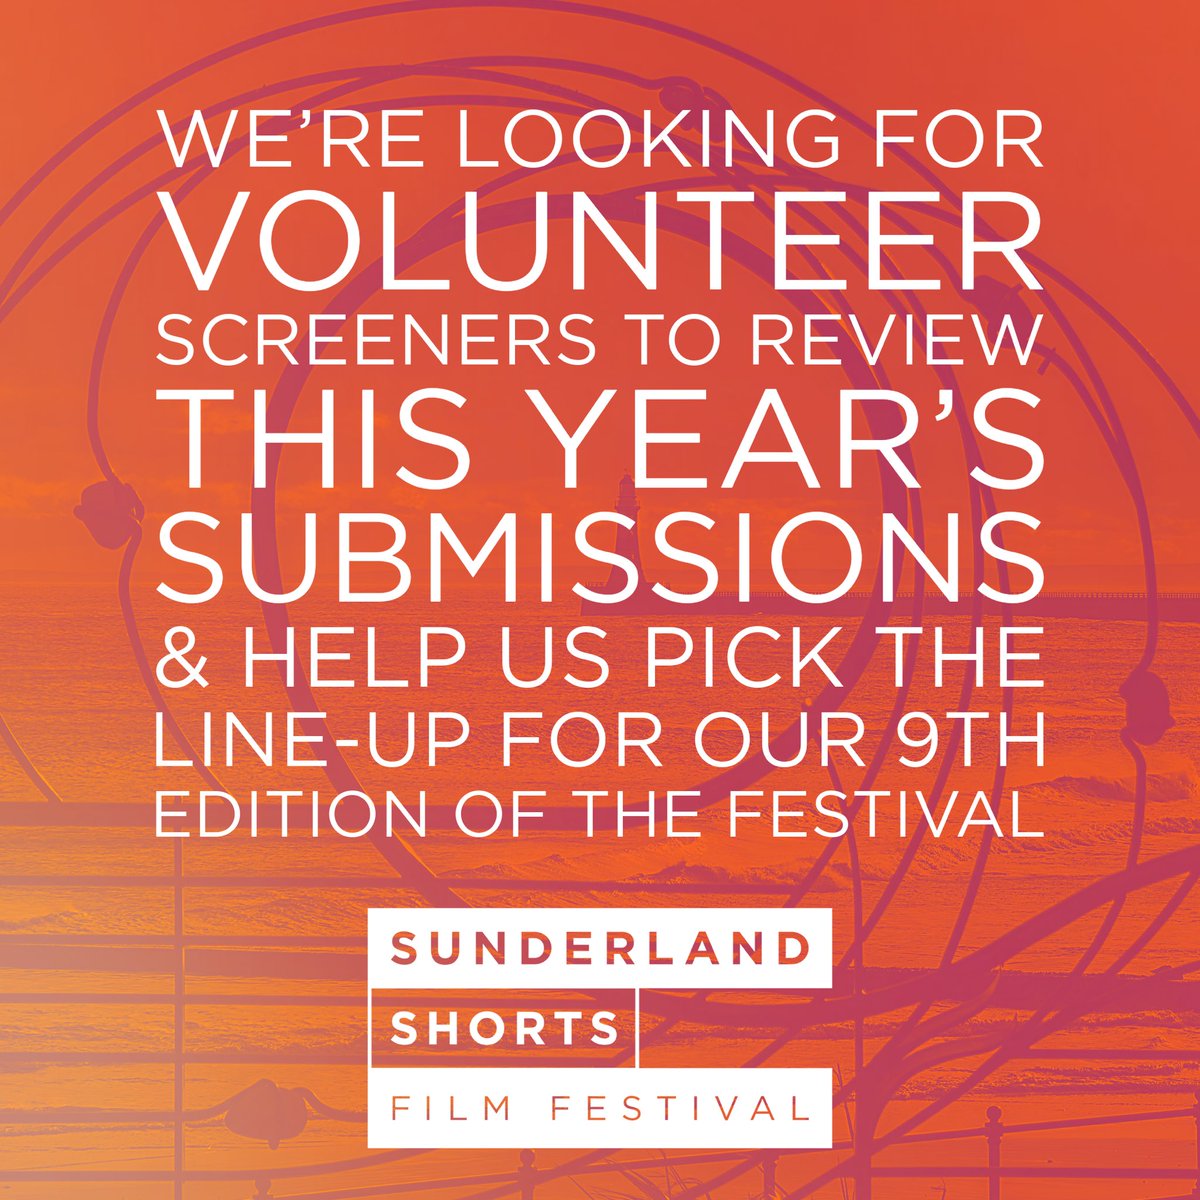 🍿 Fancy watching some amazing short films? Why not join the team! We’re looking for volunteer reviewers to help us pick the line-up of our 9th edition of the festival. Drop us a message here to find out more and take part. #SSFF24